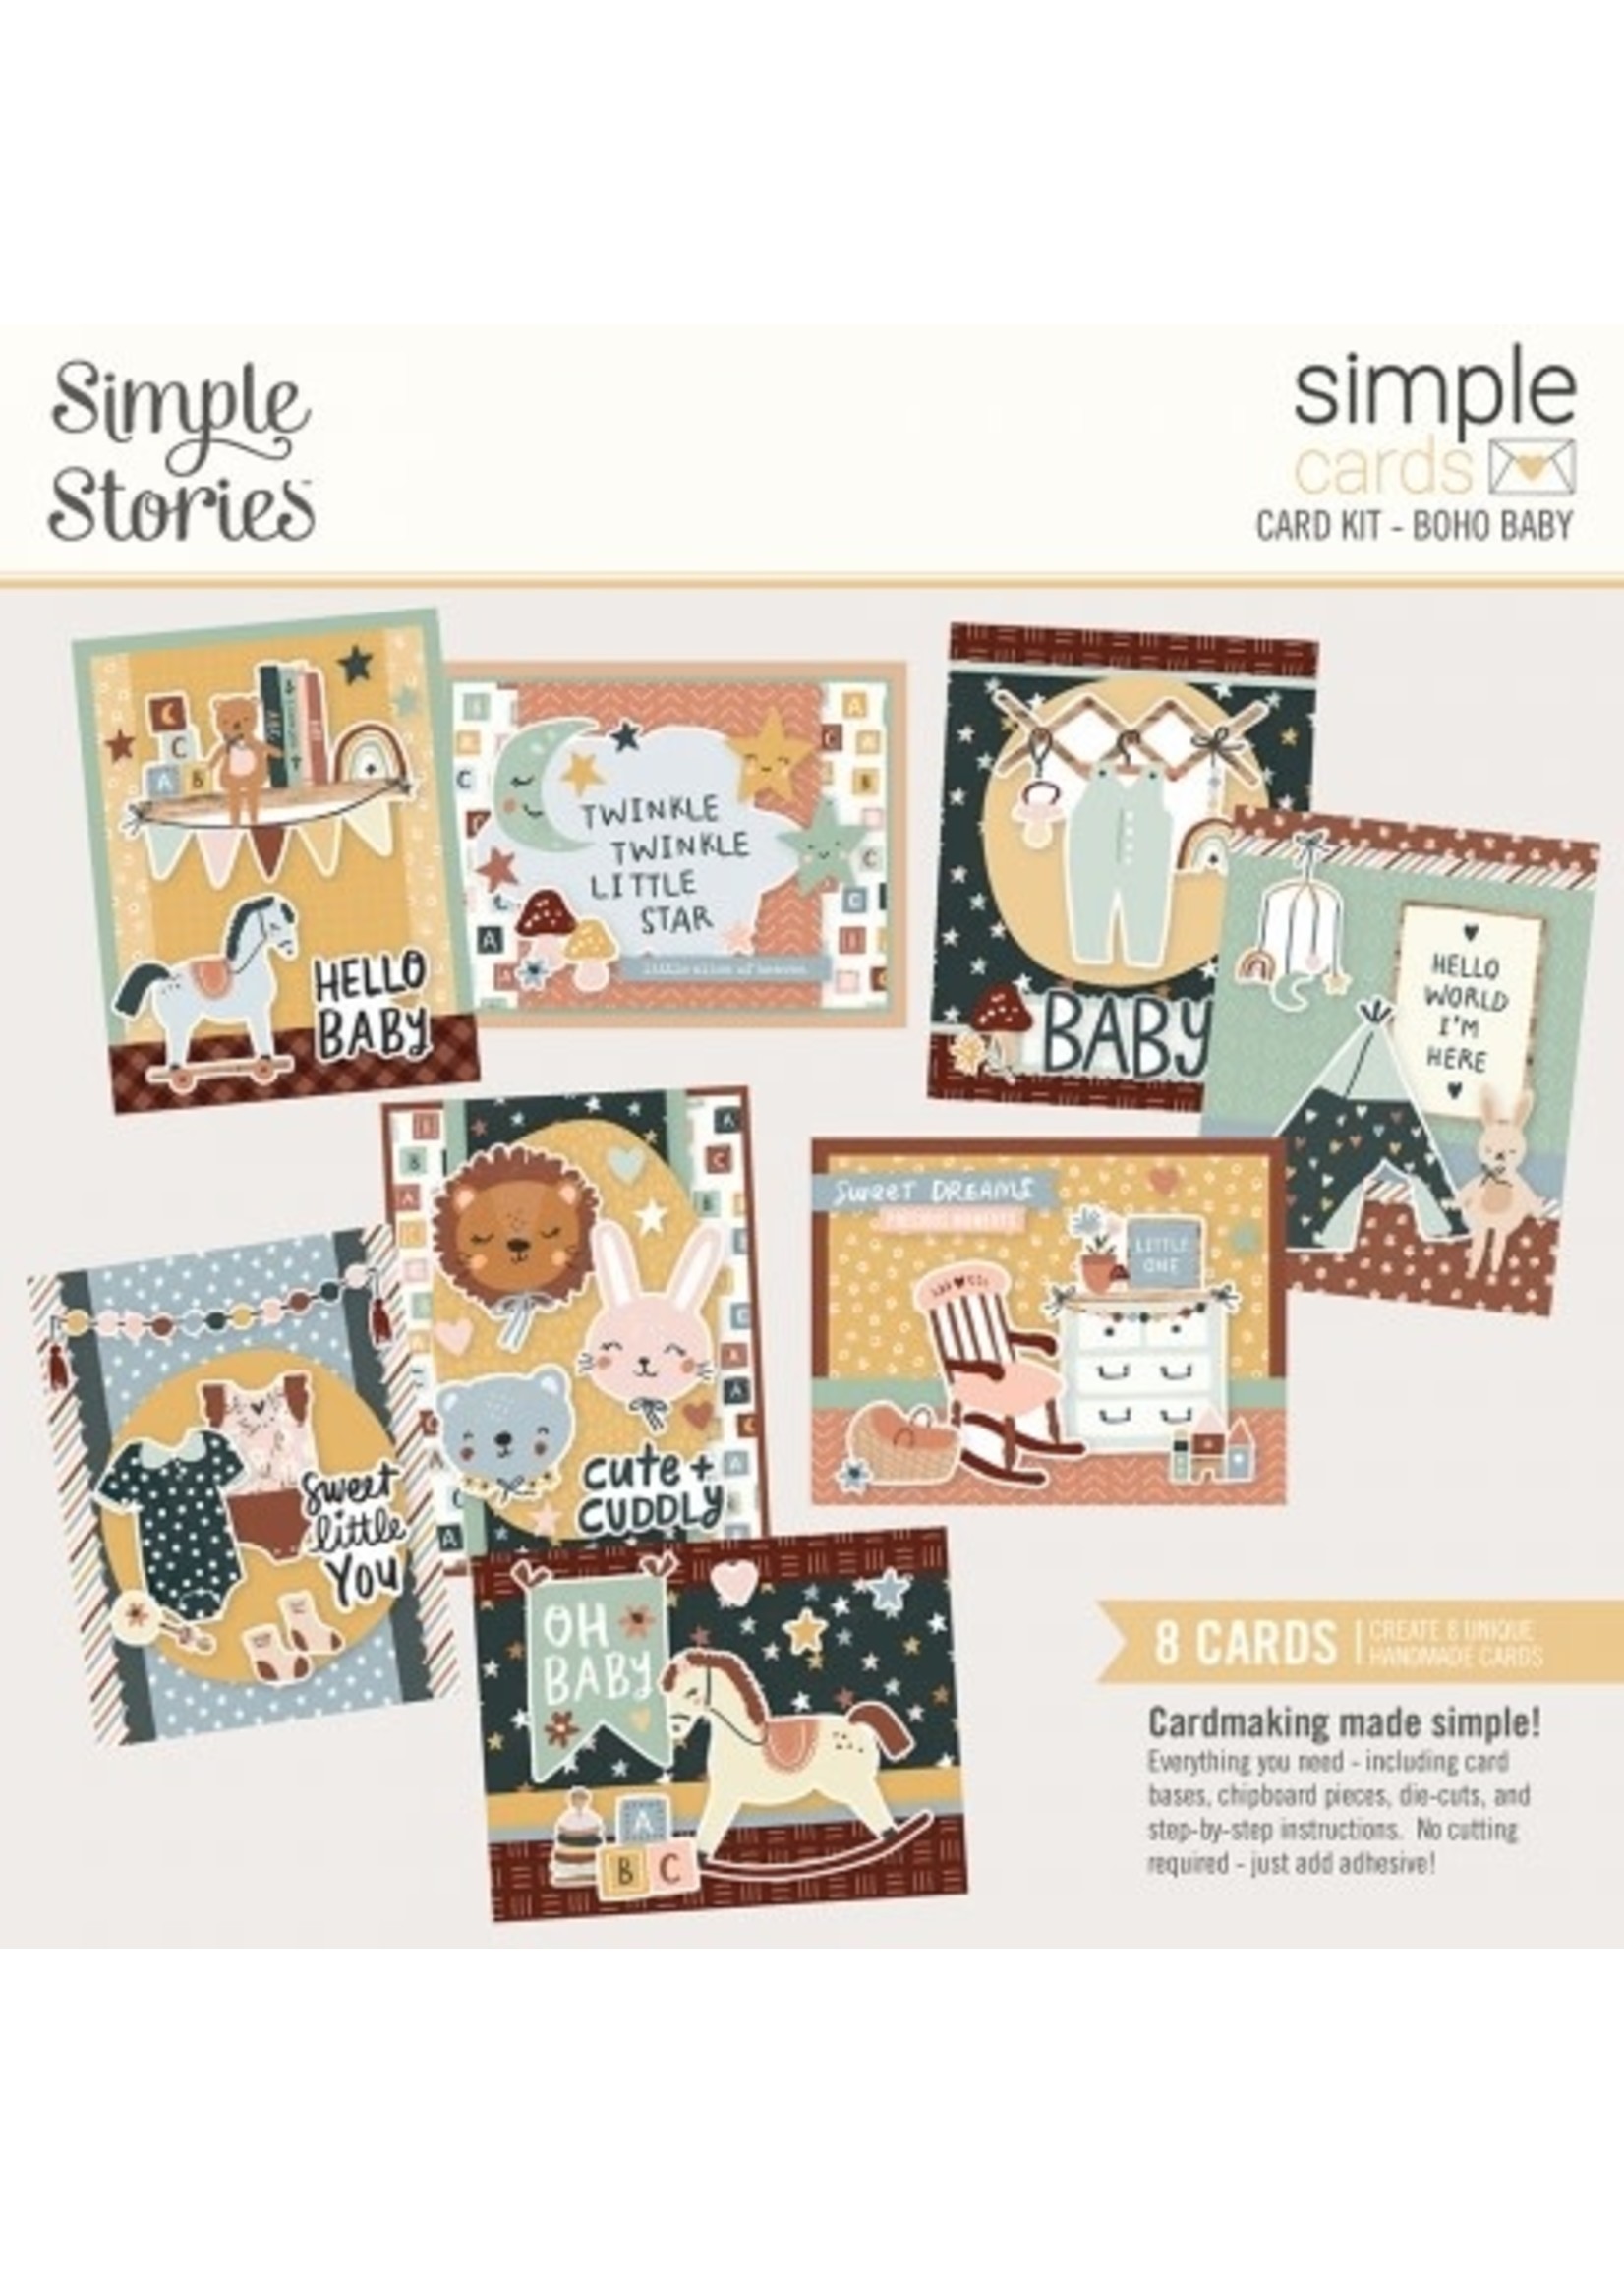 Simple Stories Boho Baby - Simple Cards Card Kit